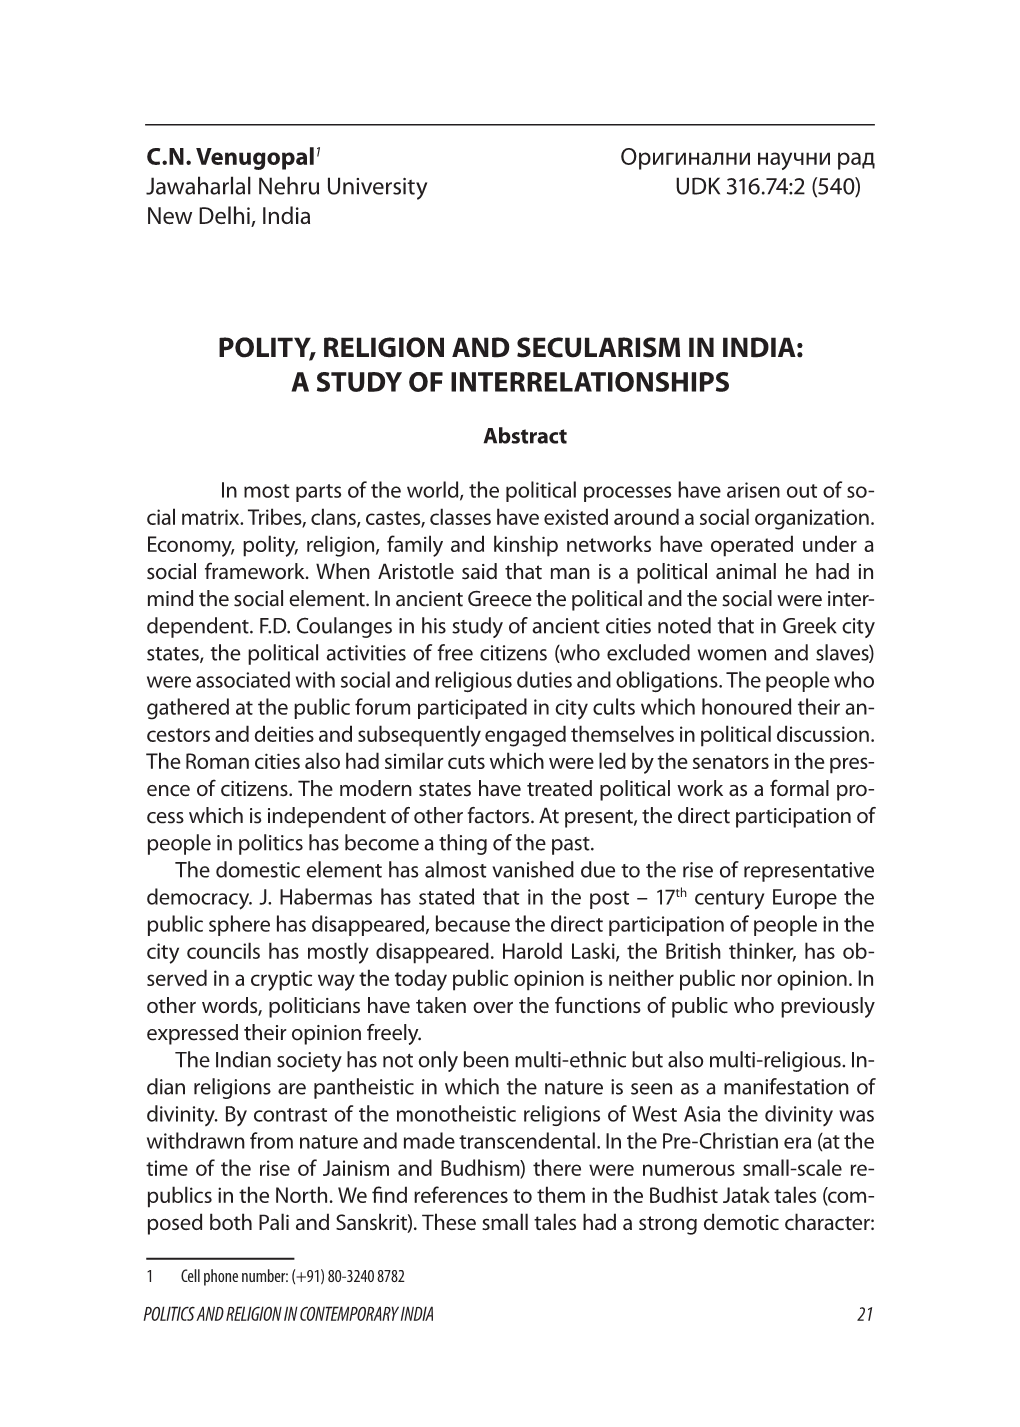 Polity, Religion and Secularism in India: a Study of Interrelationships